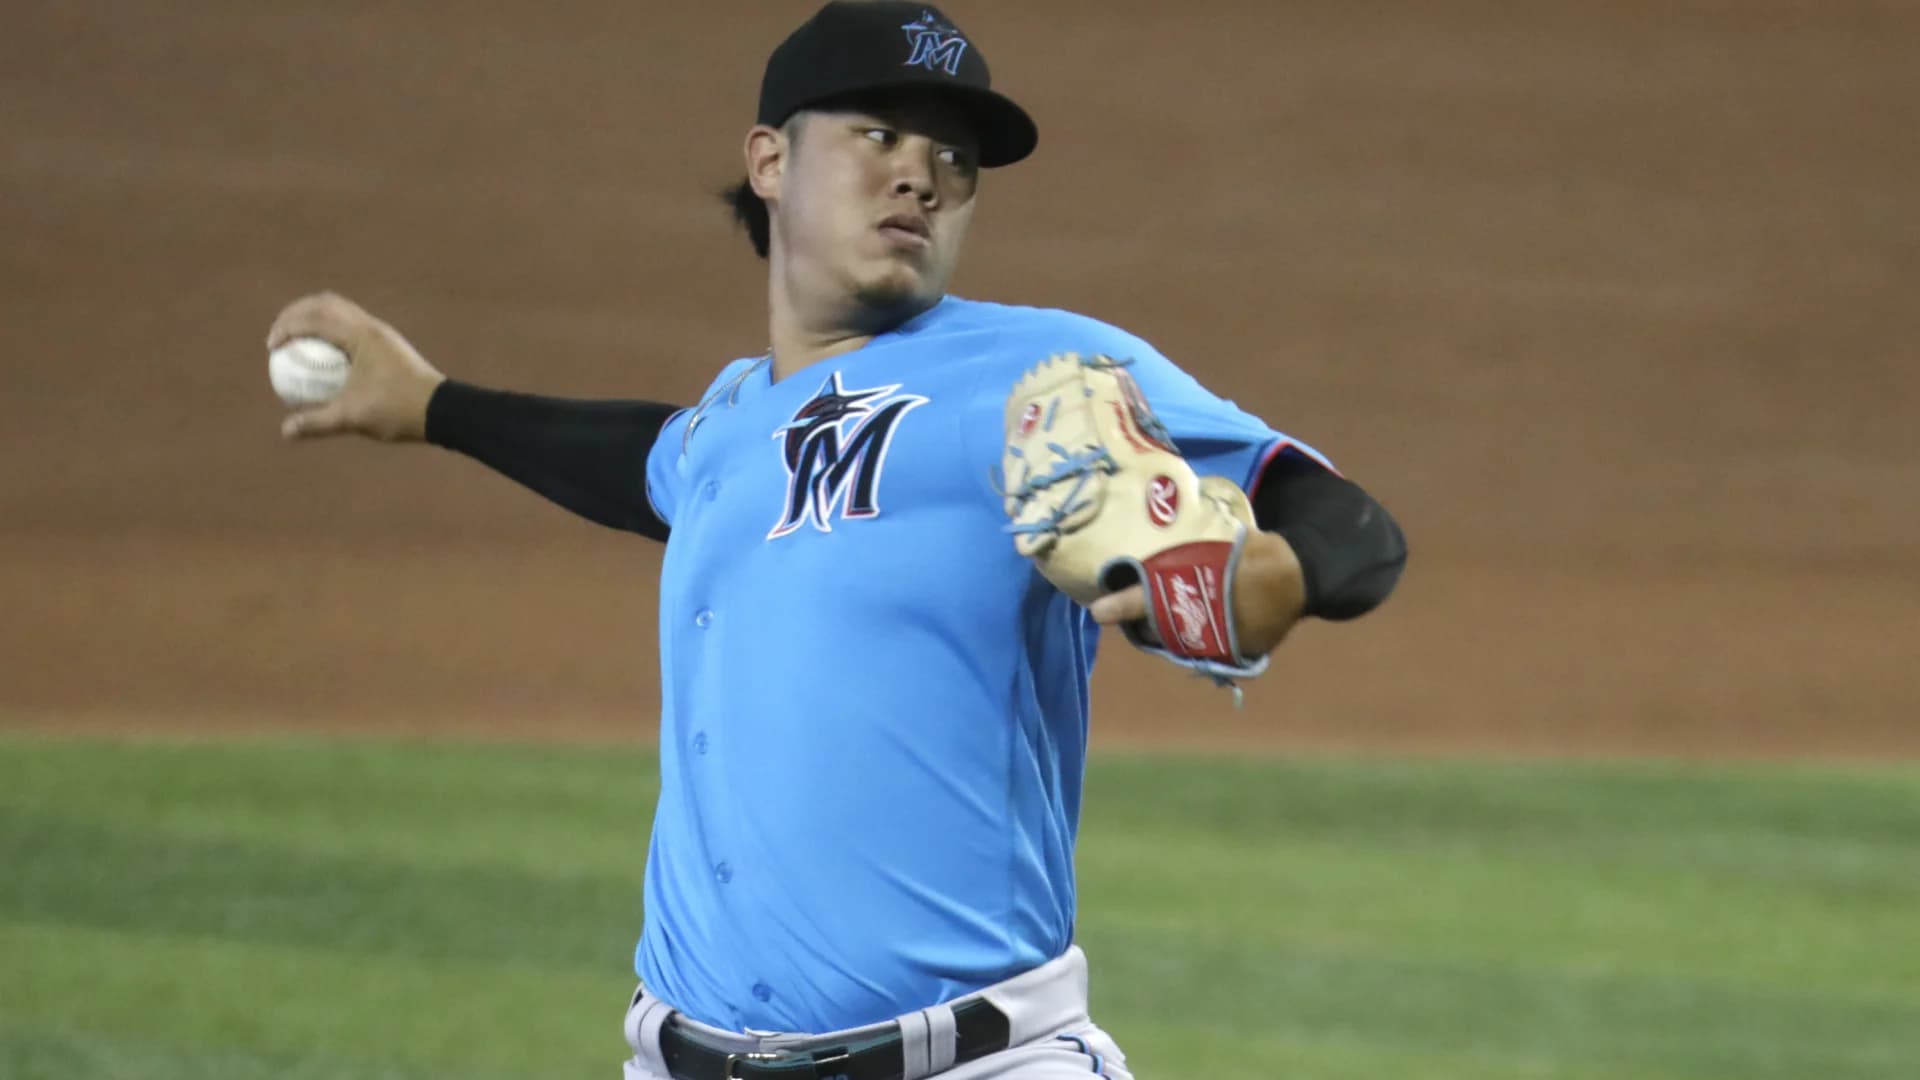 Mets get RHP Jordan Yamamoto from Marlins for minor leaguer